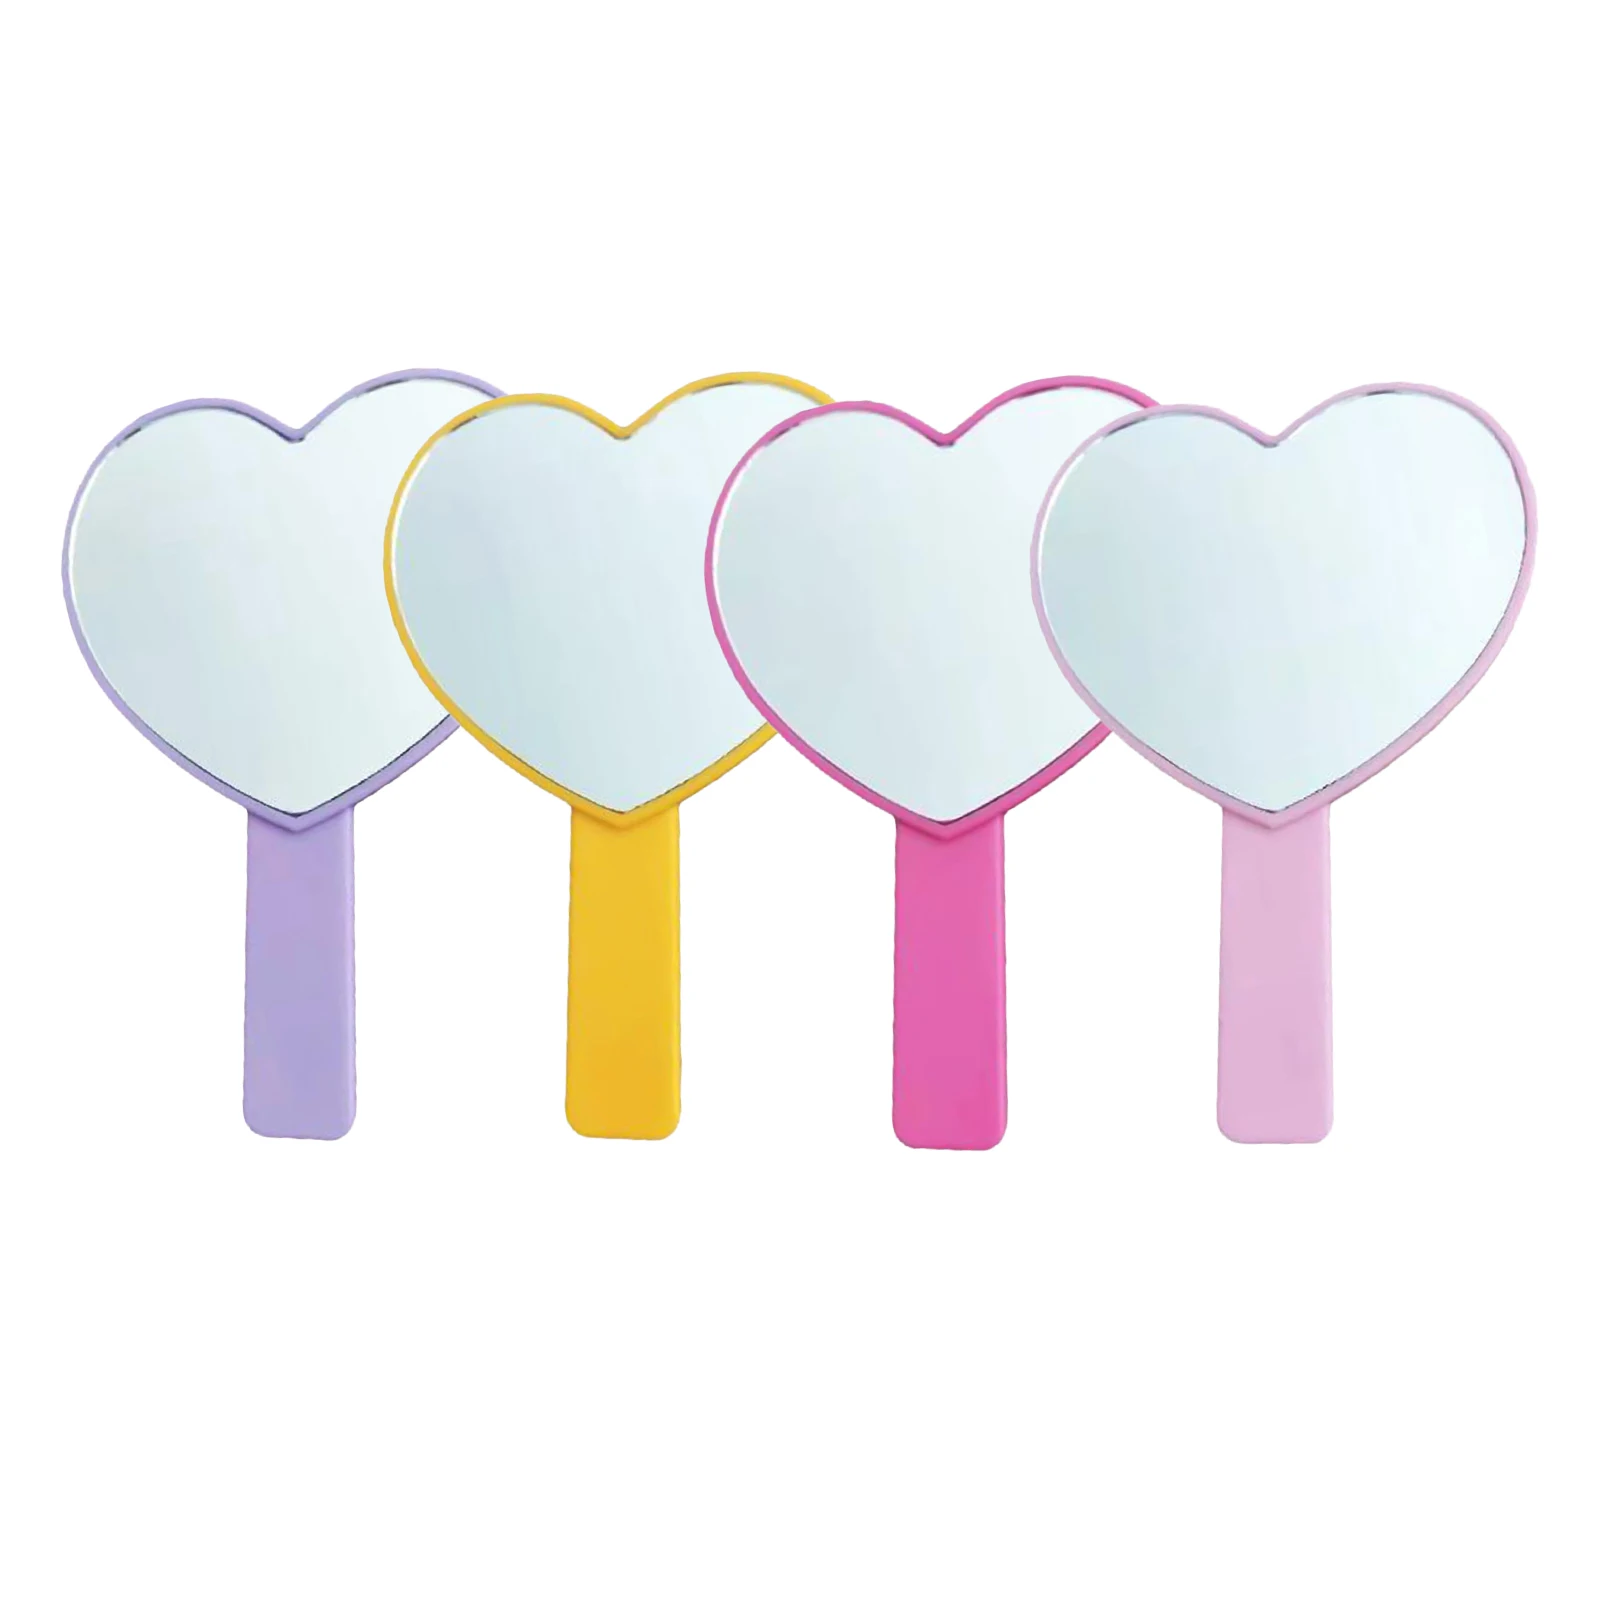 Small Compact Cute Heart Shaped Mirror Handheld Mirror Look Adorable Design